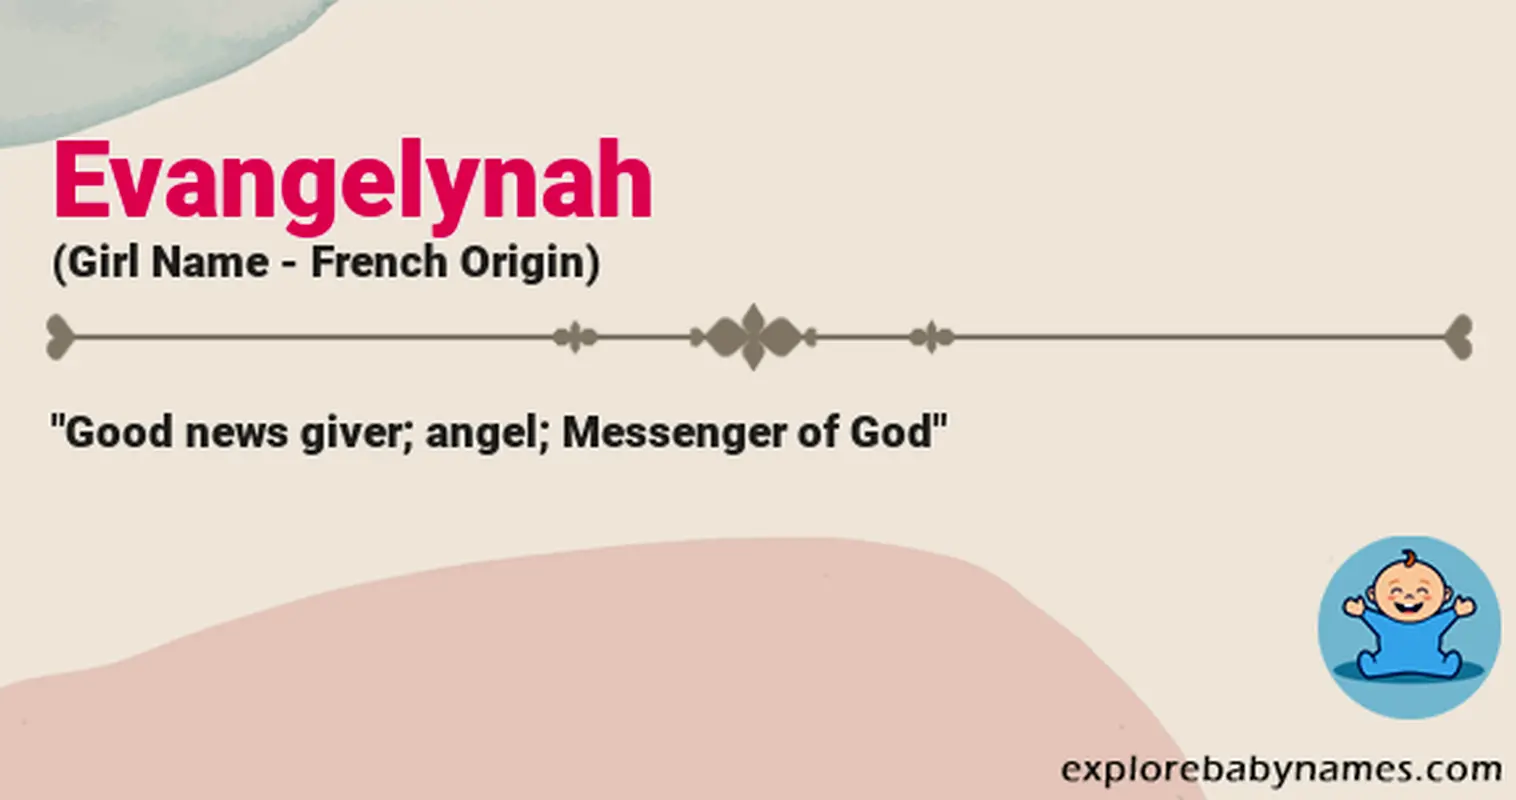 Meaning of Evangelynah